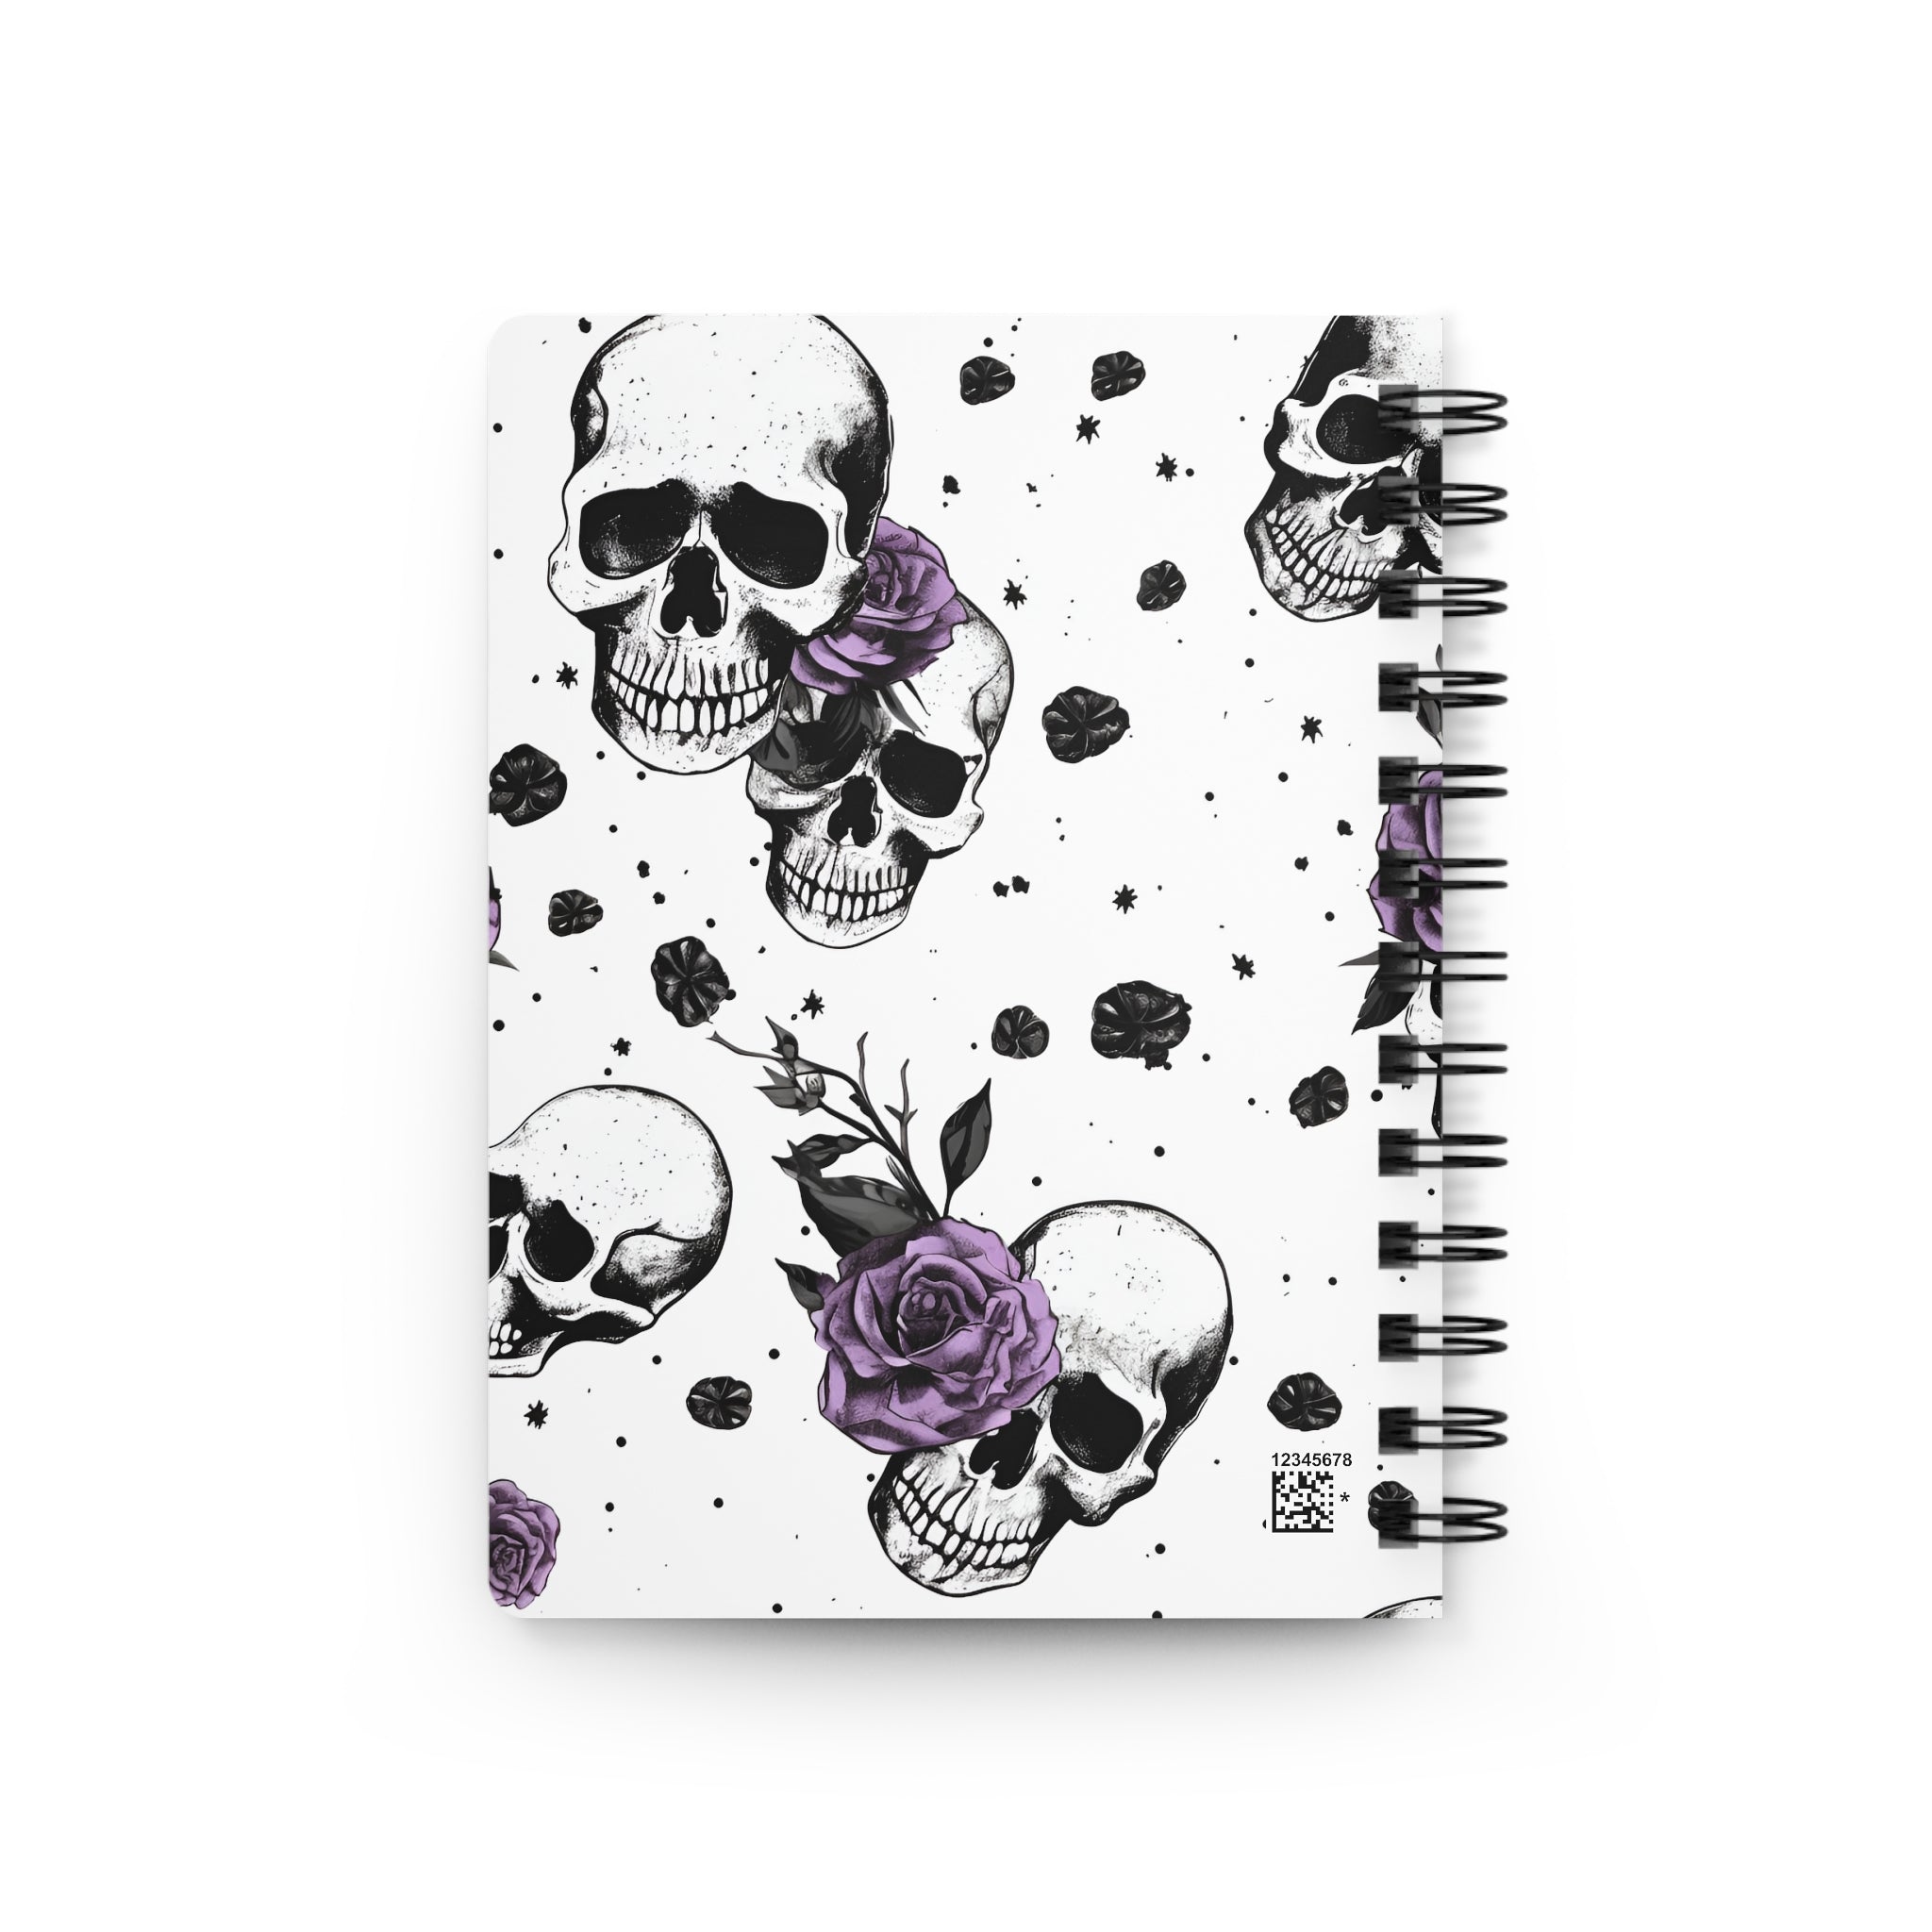 Eternally Yours Skull Lined Notebook, Gothic Violet Rose Spiral Lined 5 x 7 inch